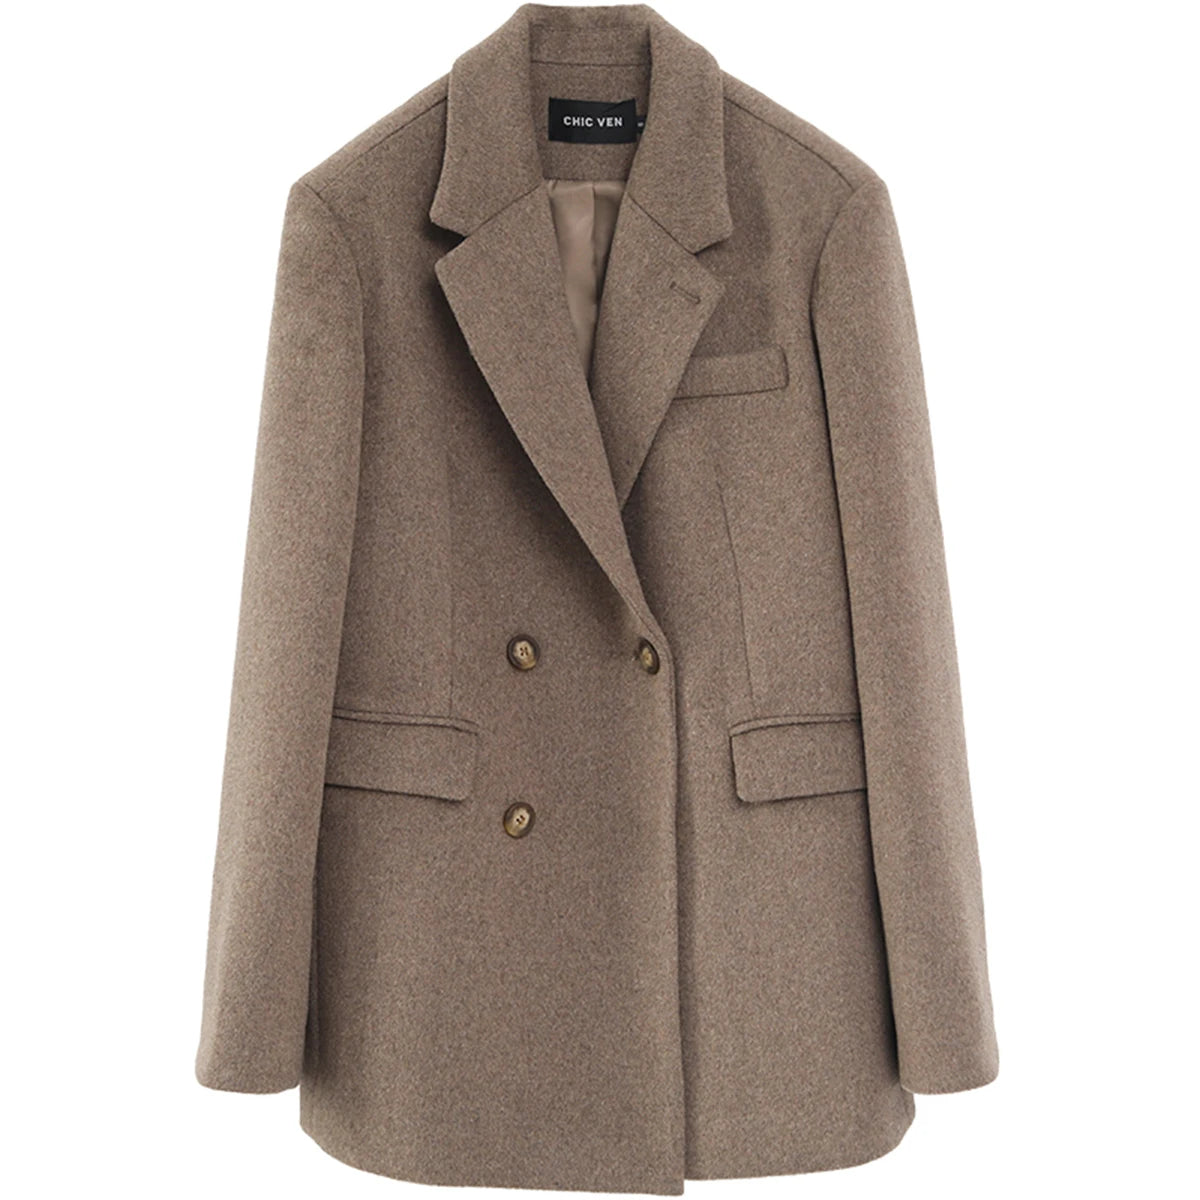 Women's Thick Warm Wool Blend Mid-Long Blazer: Solid Color, Available in 2 Colors